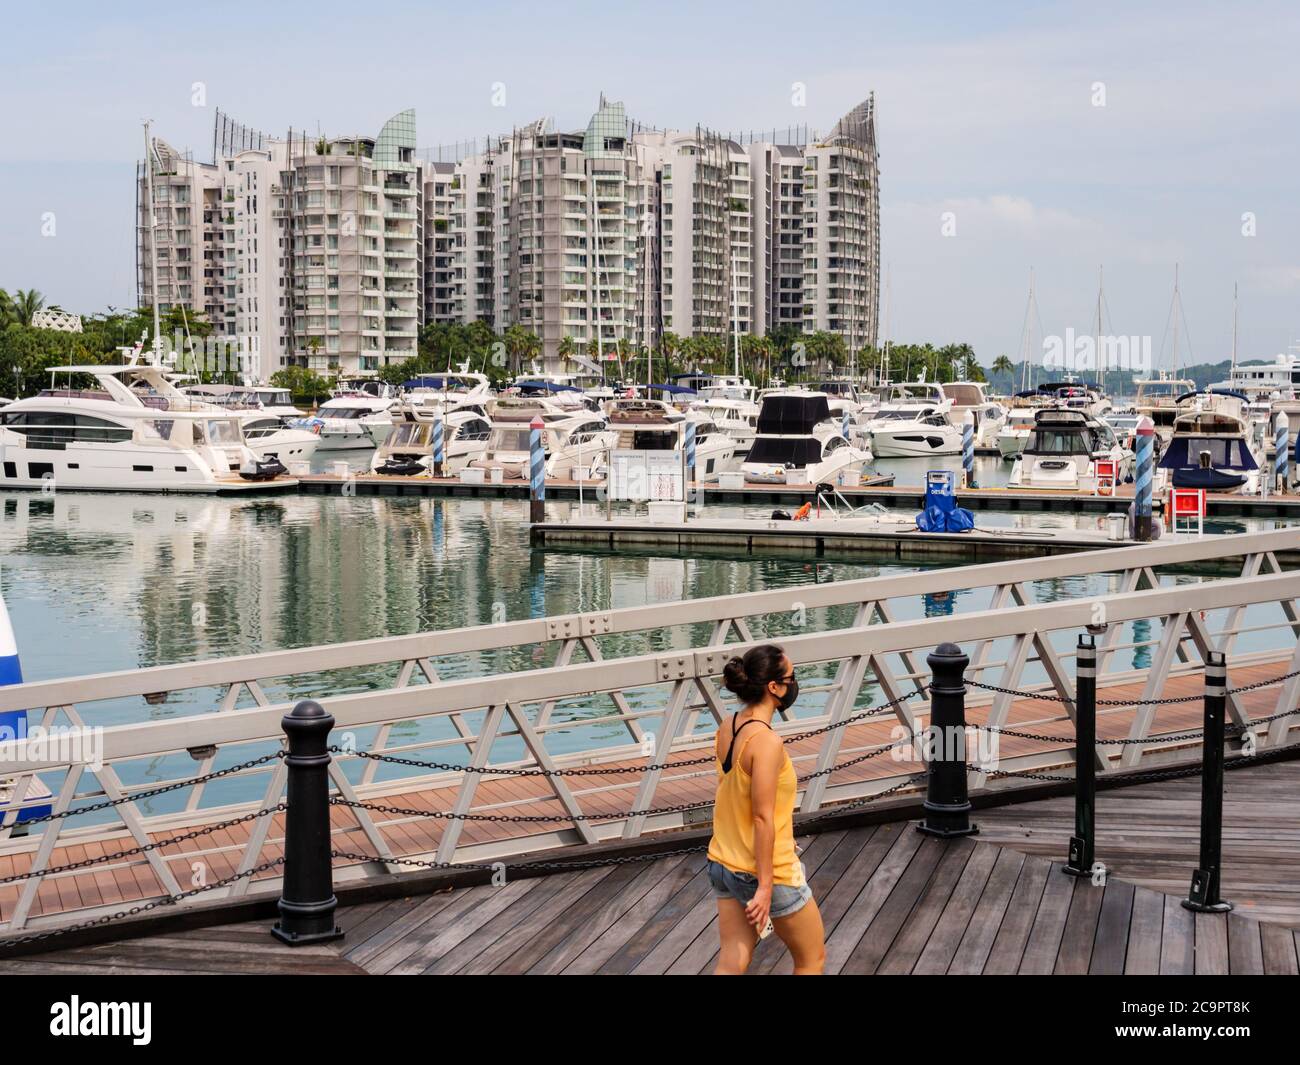 SINGAPORE – JUL 31, 2020 – Asian woman walks past a row of recreational boats docked at Sentosa Island with luxury condominiums in the background Stock Photo